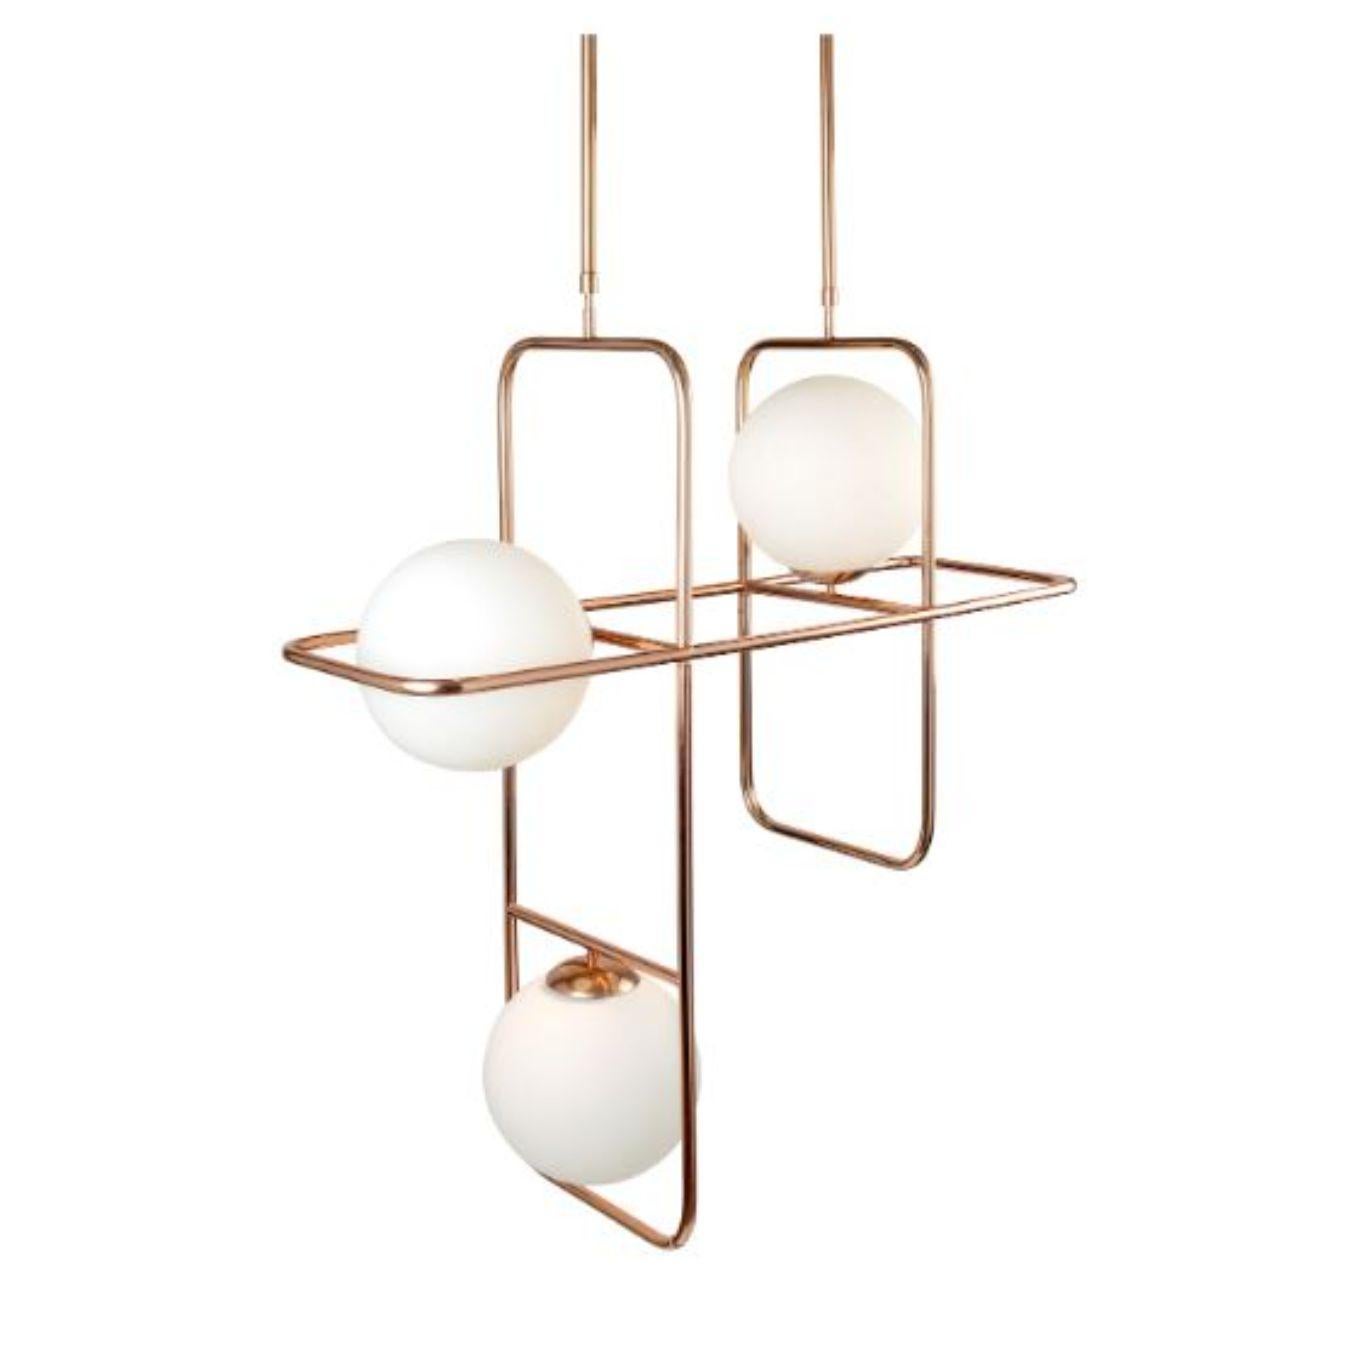 Copper link I suspension lamp by Dooq
Dimensions: W 100 x D 33 x H 100 cm
Materials: lacquered metal, polished or brushed metal, copper.
Also available in different colours and materials.

Information:
230V/50Hz
3 x max. G9
5W LED

120V/60Hz
3 x